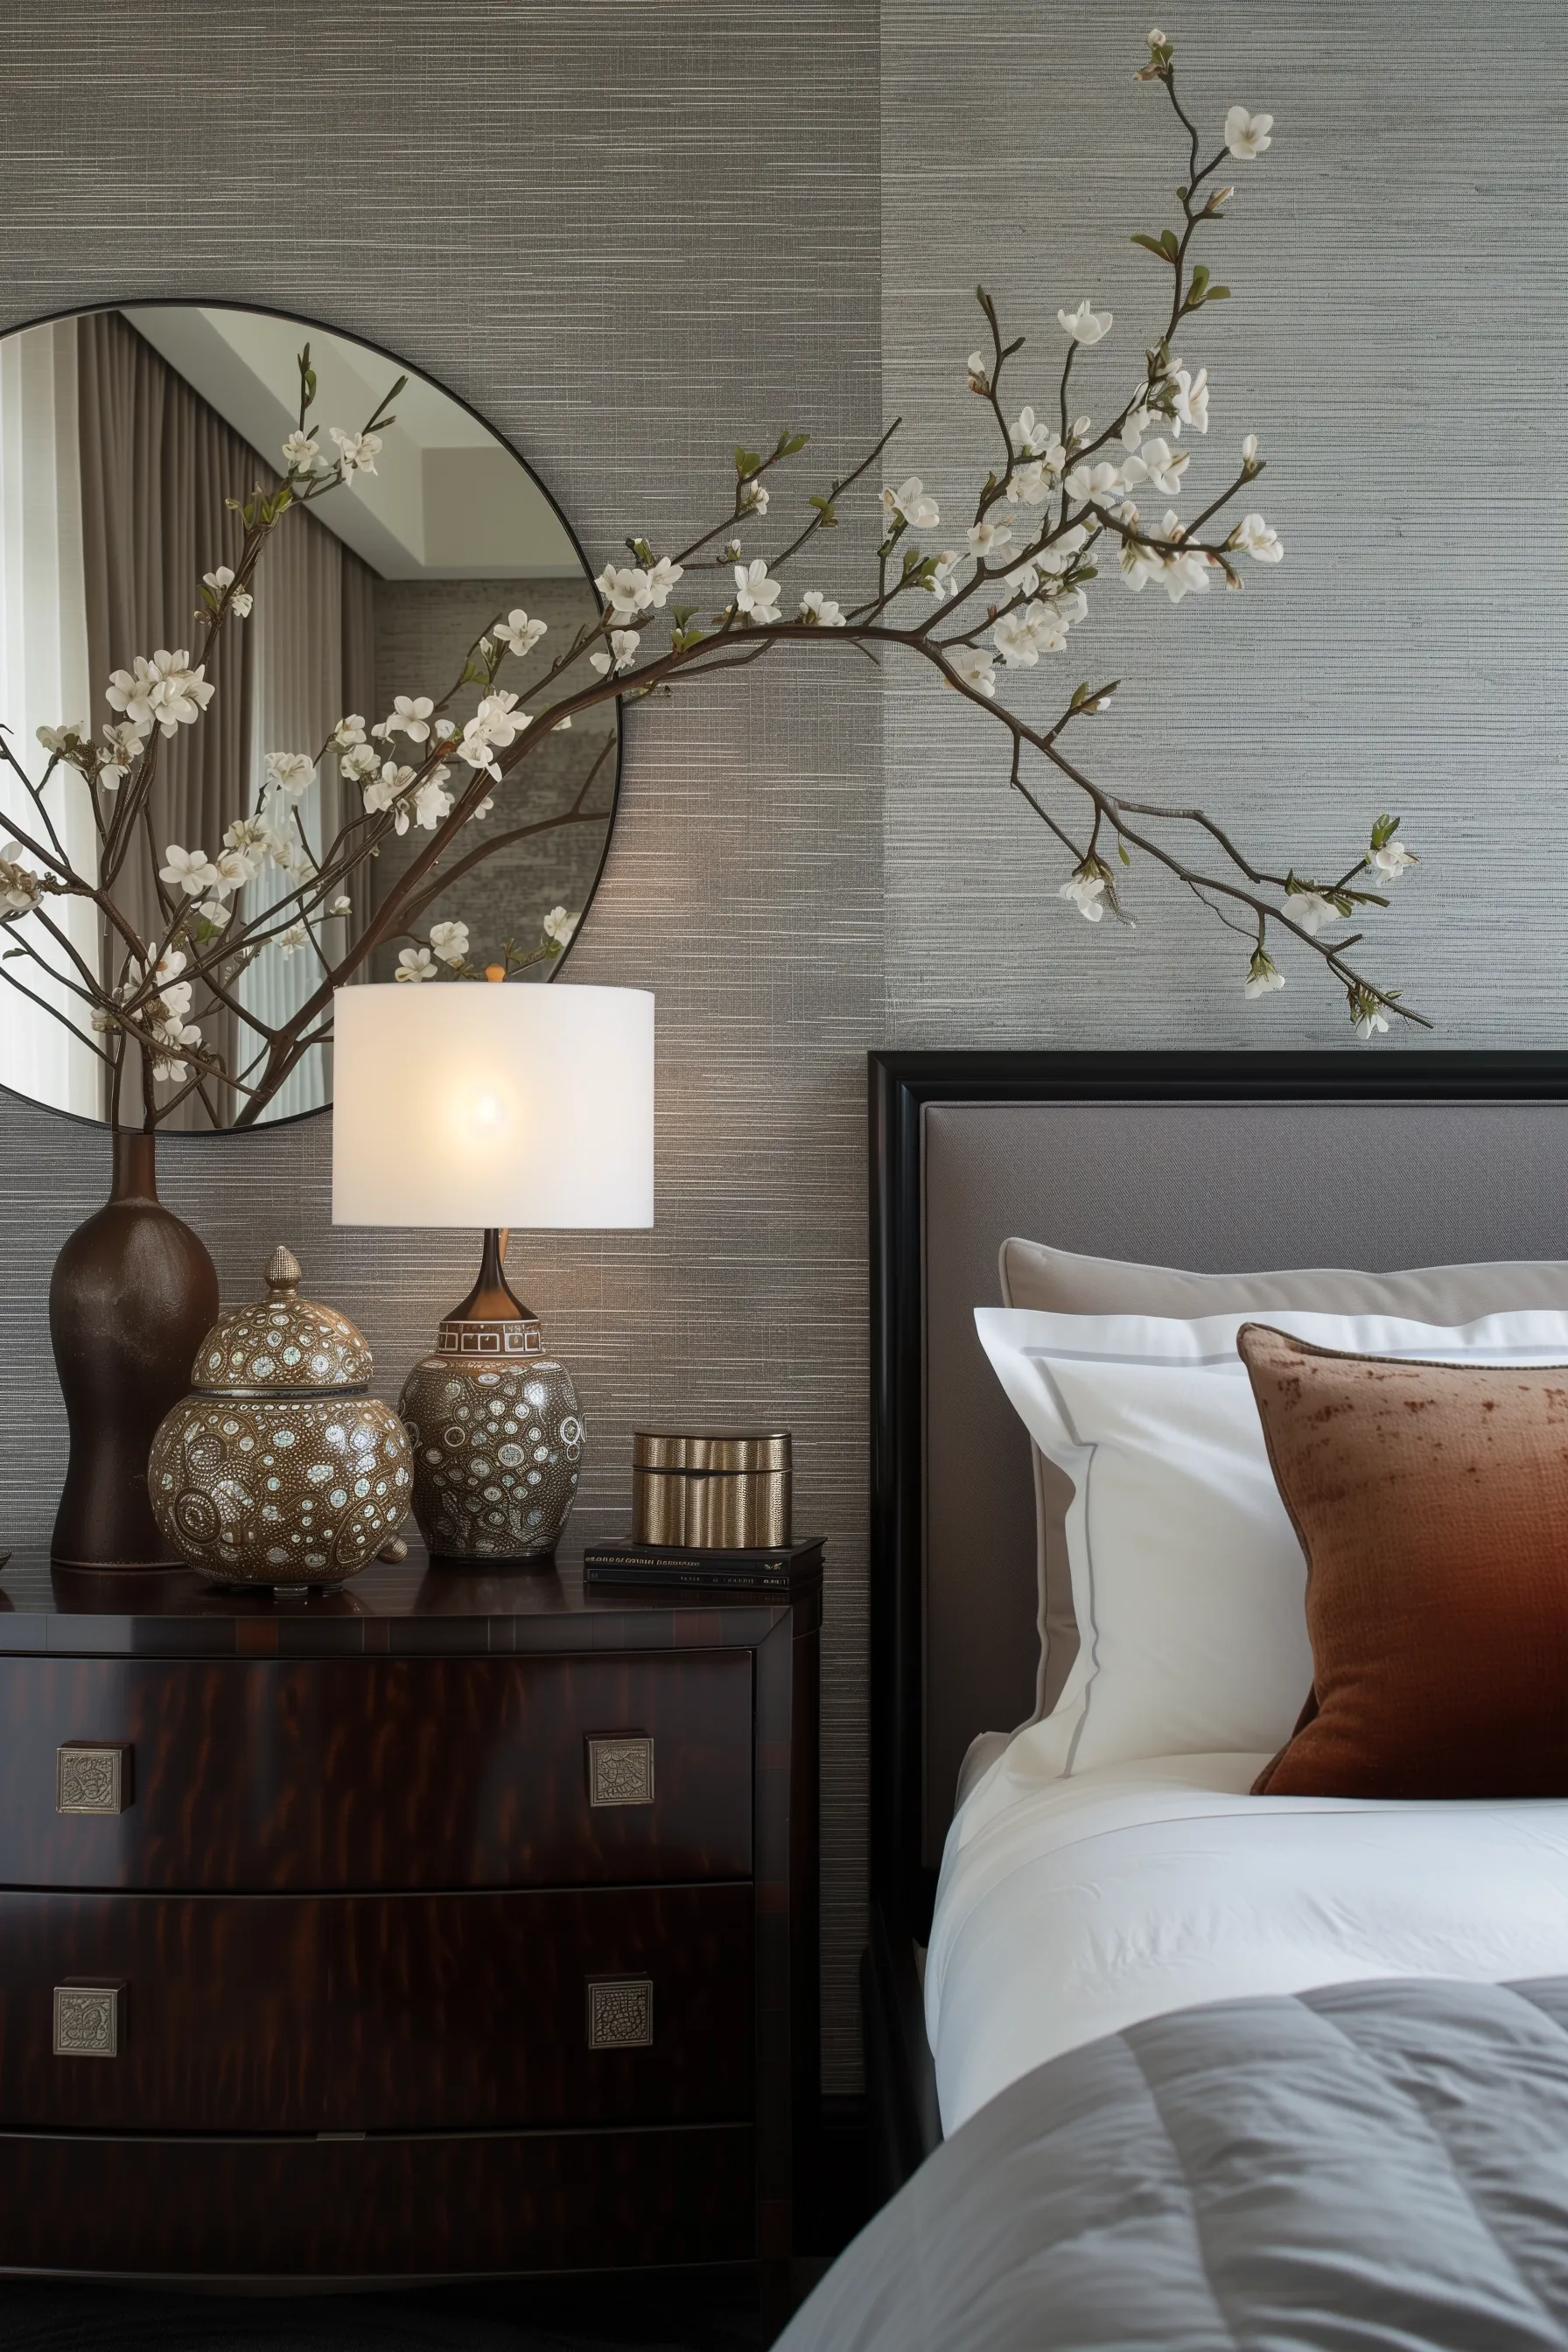 sculptural lighting in a bedroom with a decorated vase.